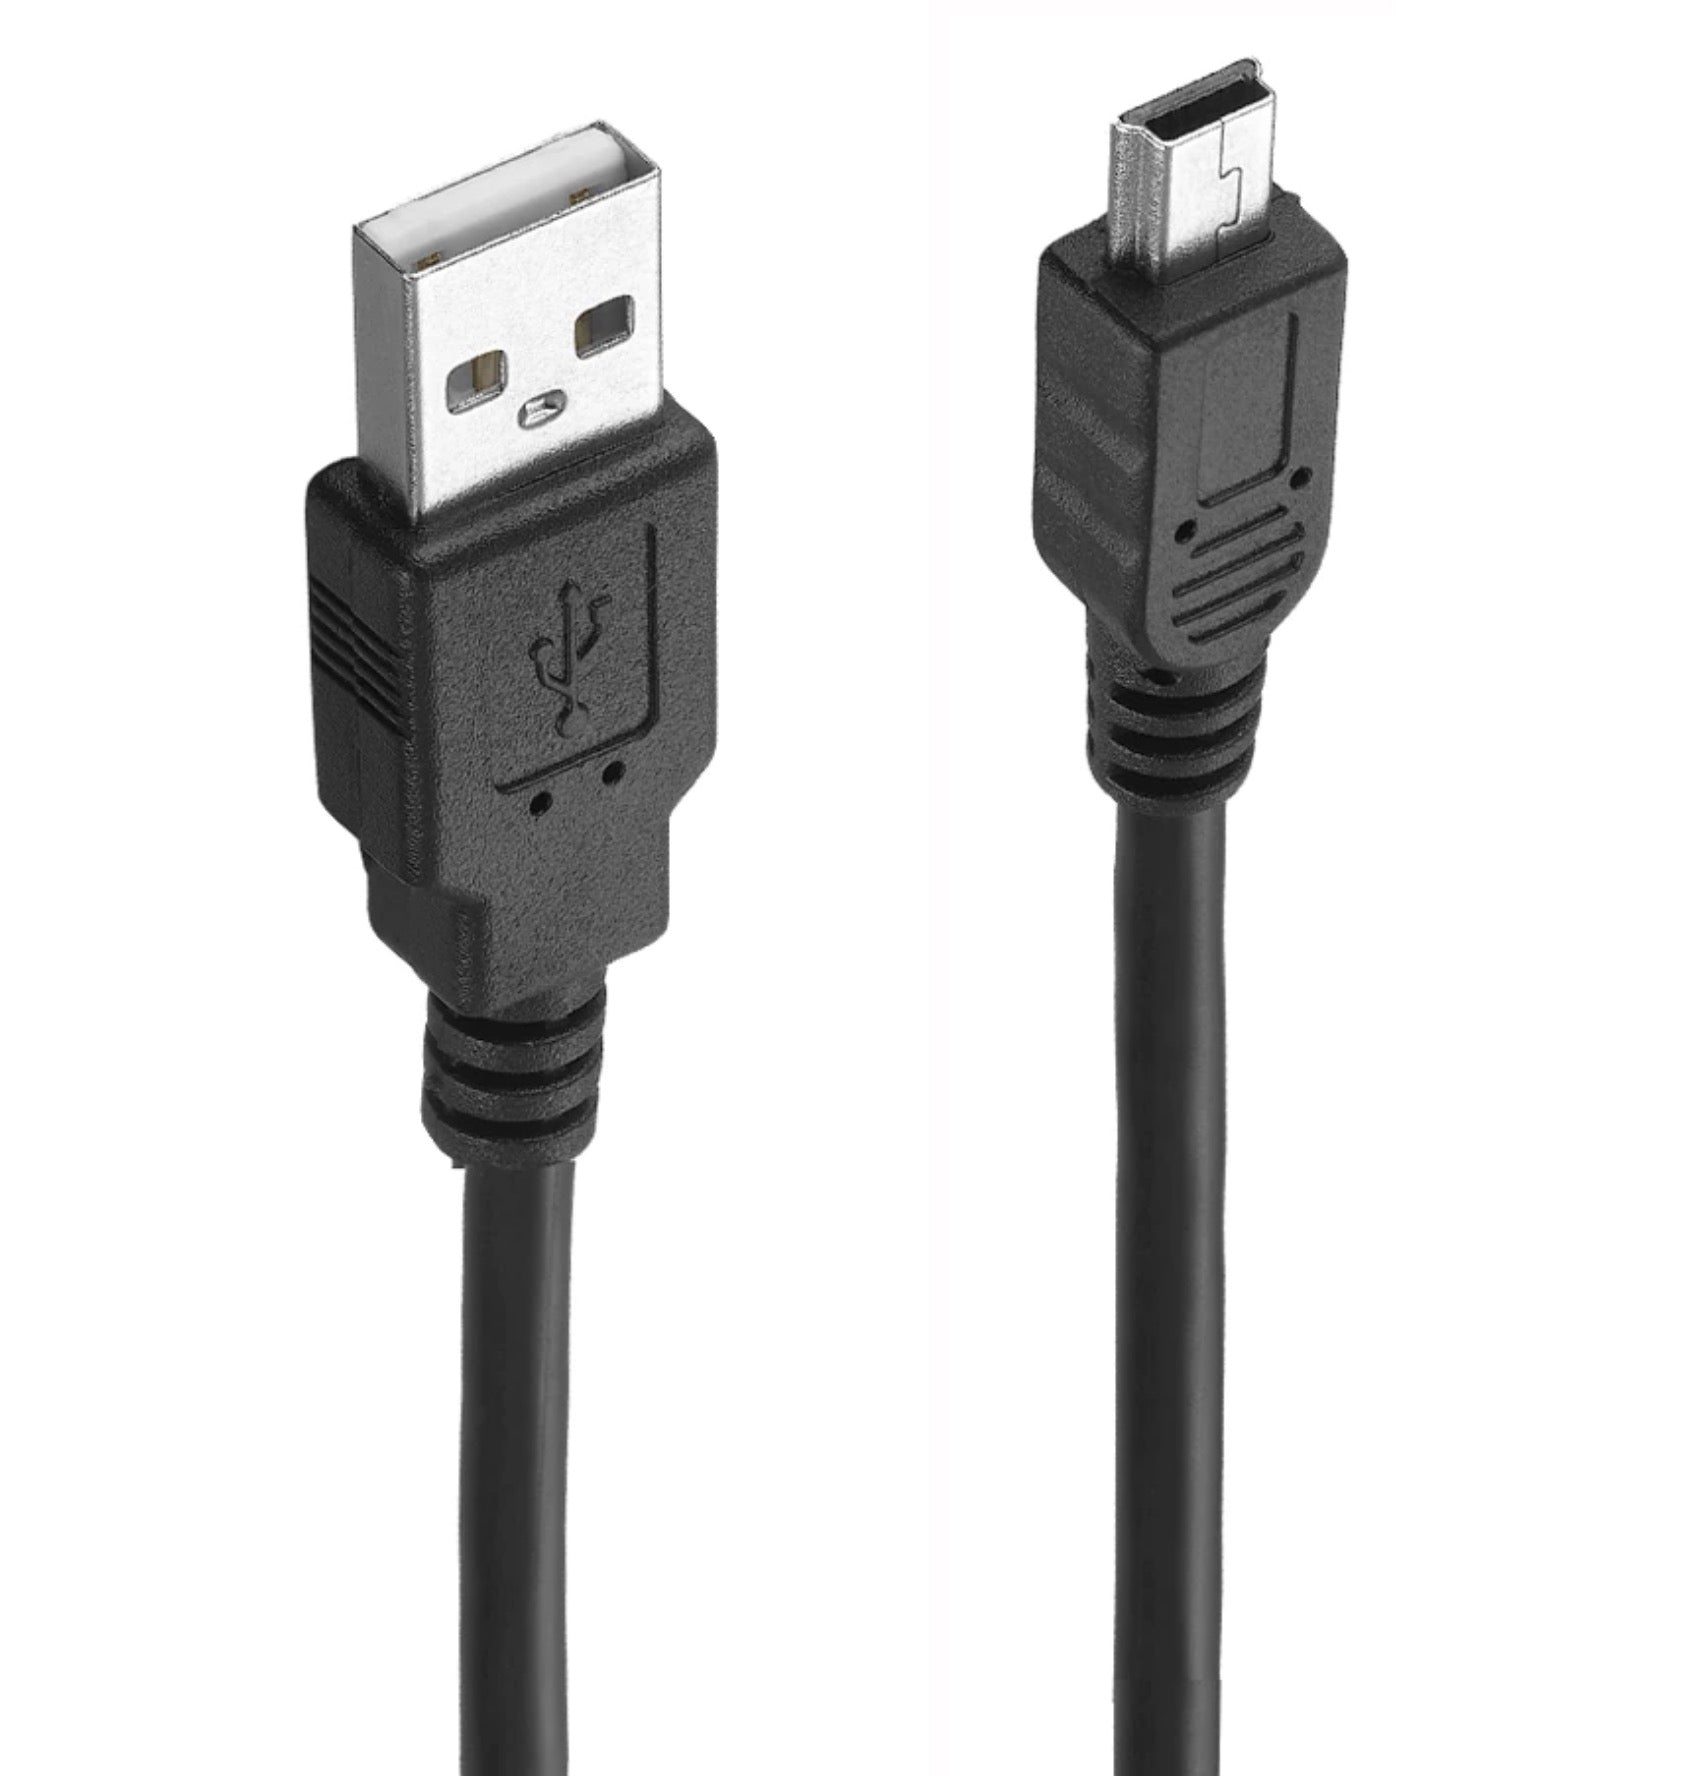 USB 2.0 A Male to USB Mini B Charge & Sync Cable